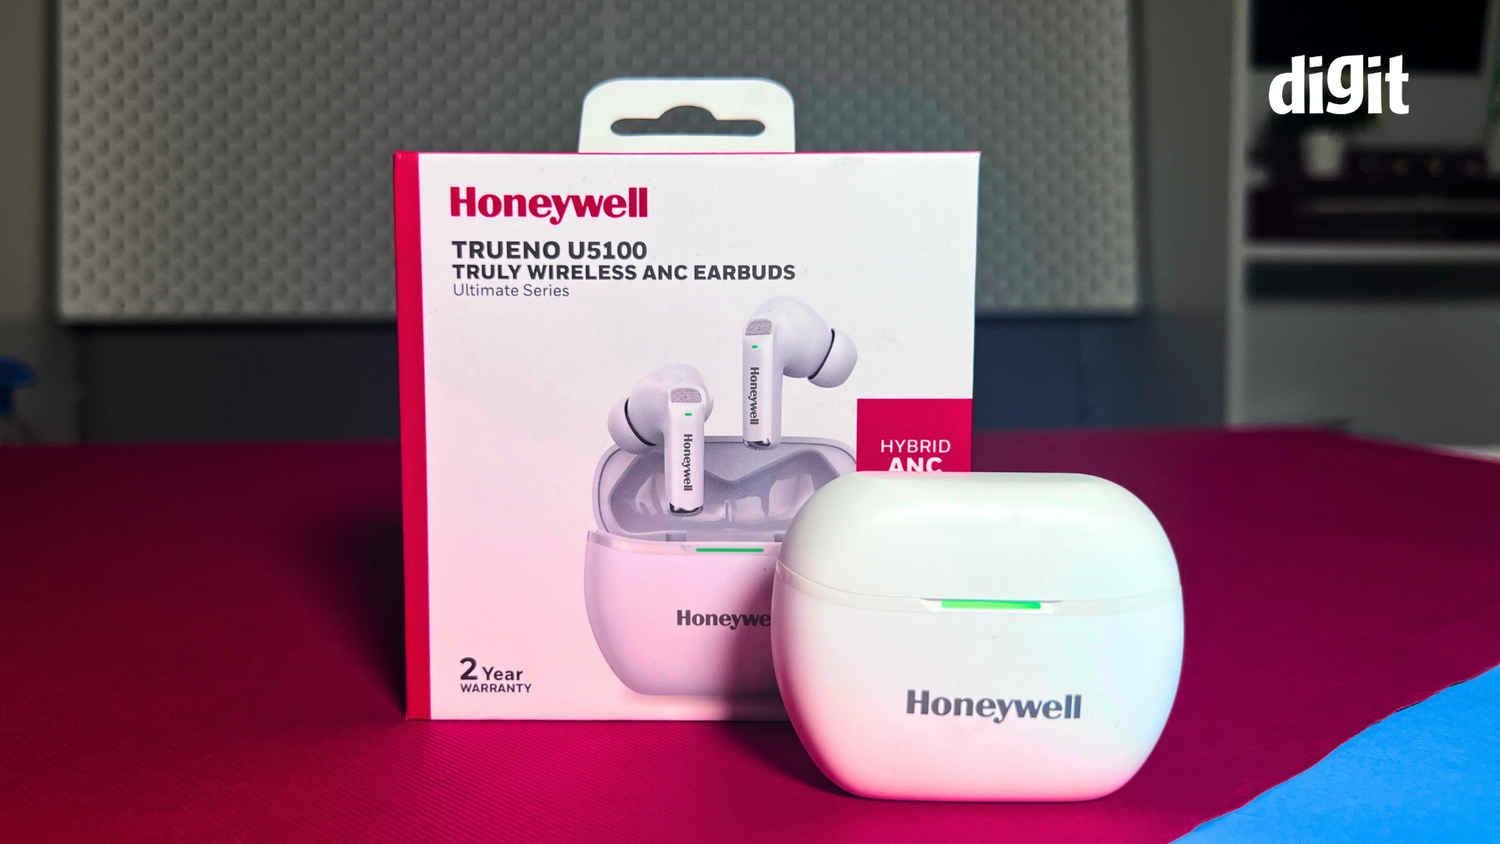 Honeywell Trueno U5100 earbuds – Well-implemented features coupled with surprising performance!